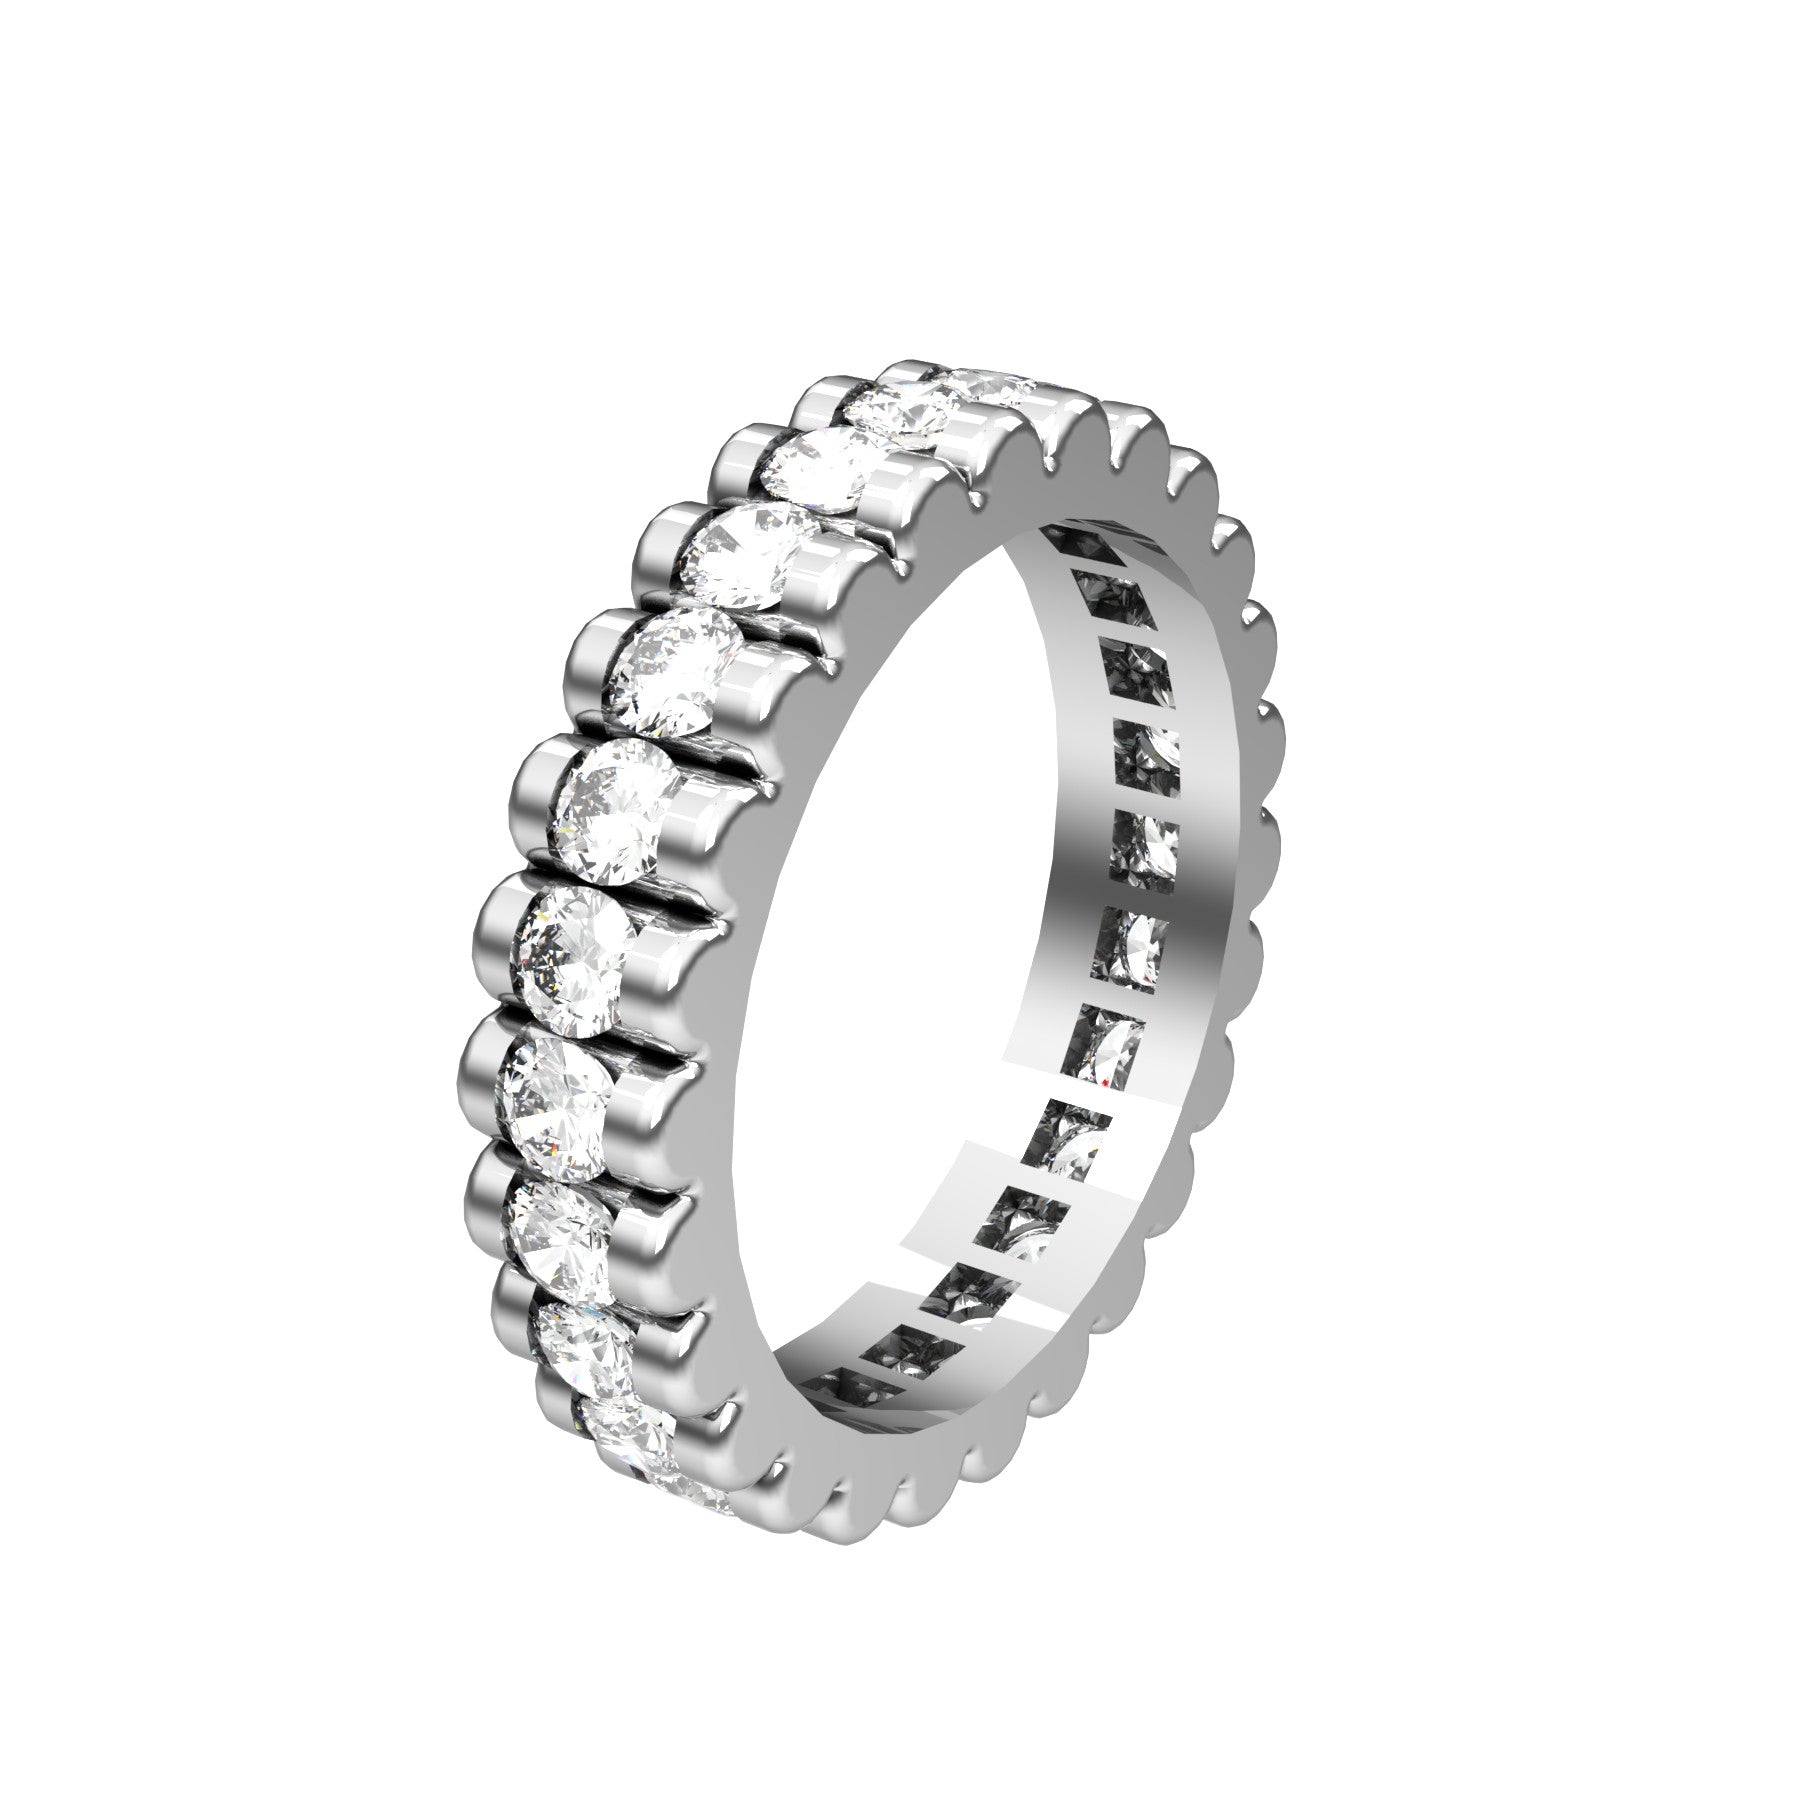 loving flower wedding band, 18 k white gold, 0,05 ct round natural diamonds, weight about 4,5 g. (0.16 oz), width 4,20 mm